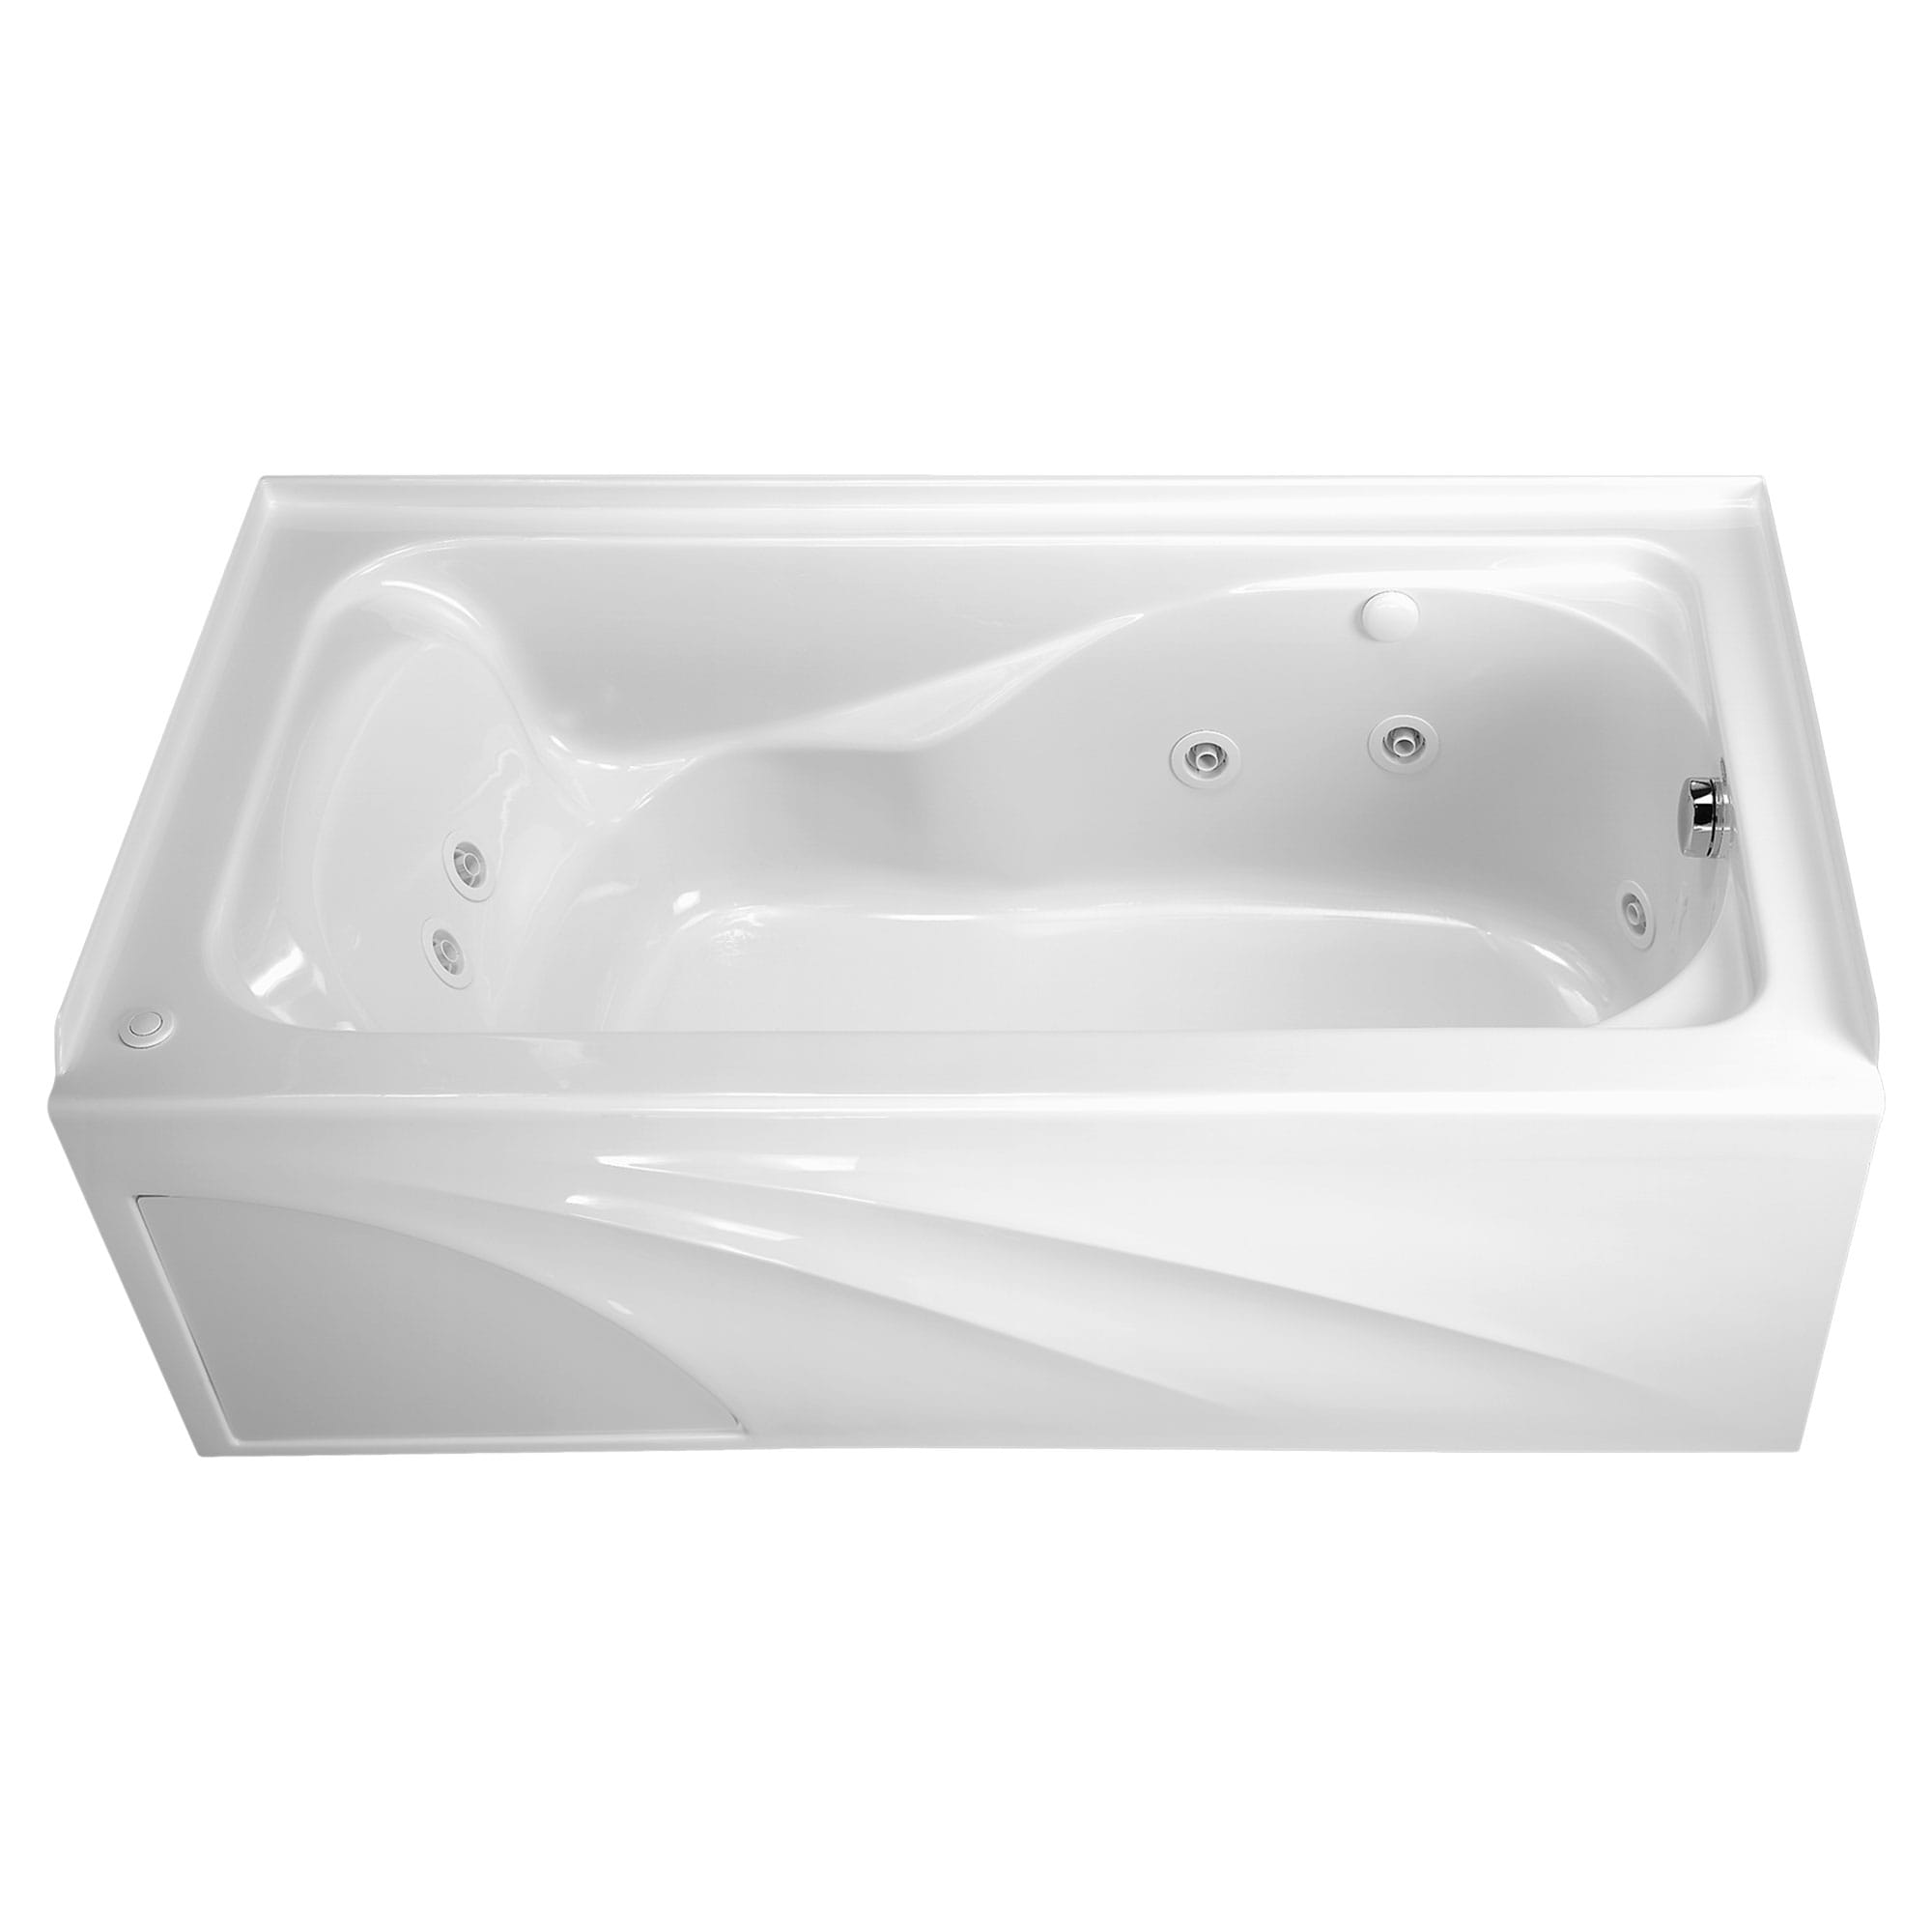 Cadet® 60 x 32-Inch Integral Apron Bathtub Left-Hand Outlet With Hydromassage System